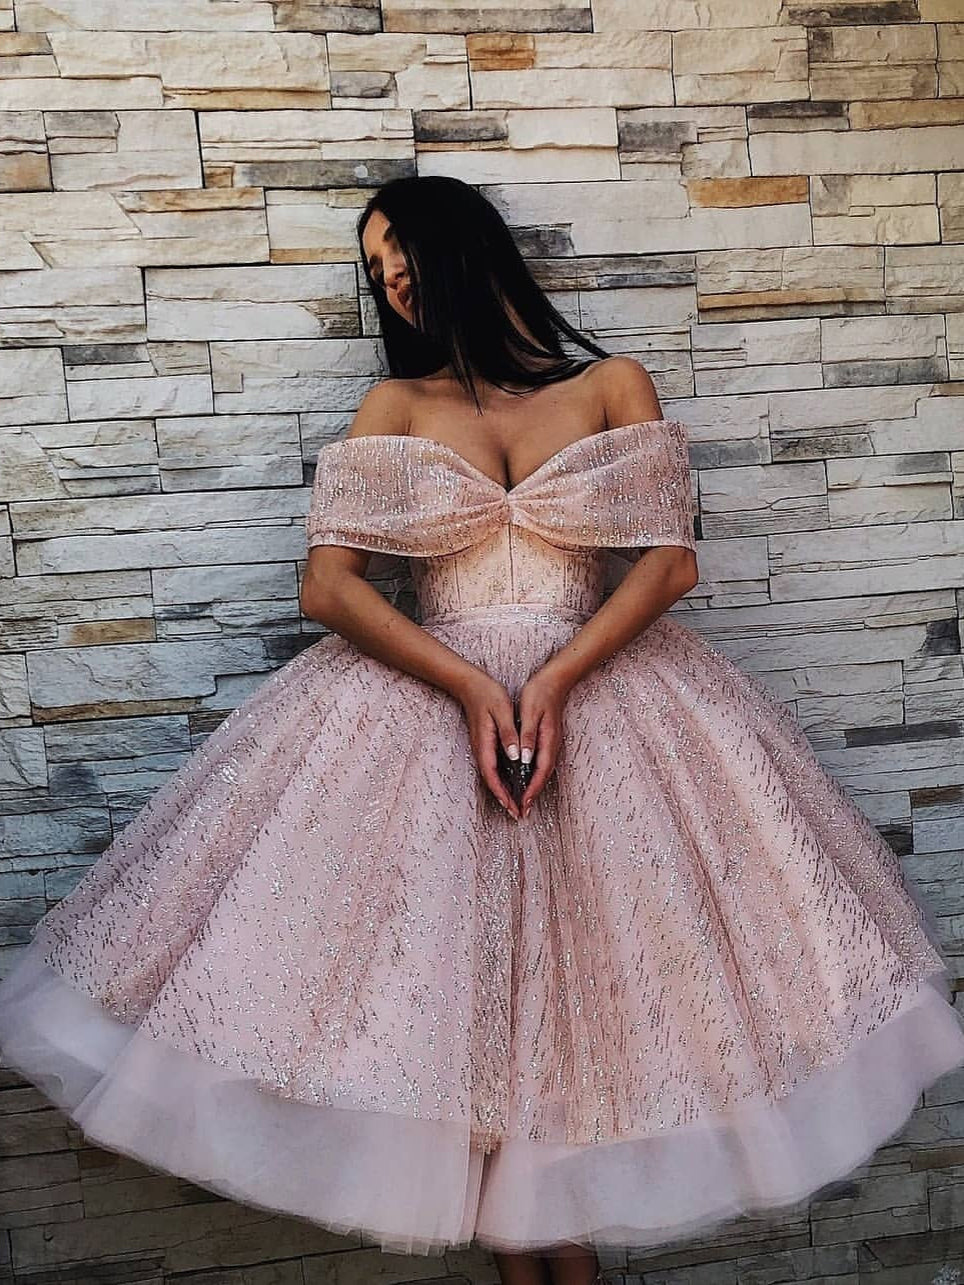 Sparkly Ball Gown Homecoming Dresses Tea-length Short Prom Dress Lace Party Dress JK839|Annapromdress